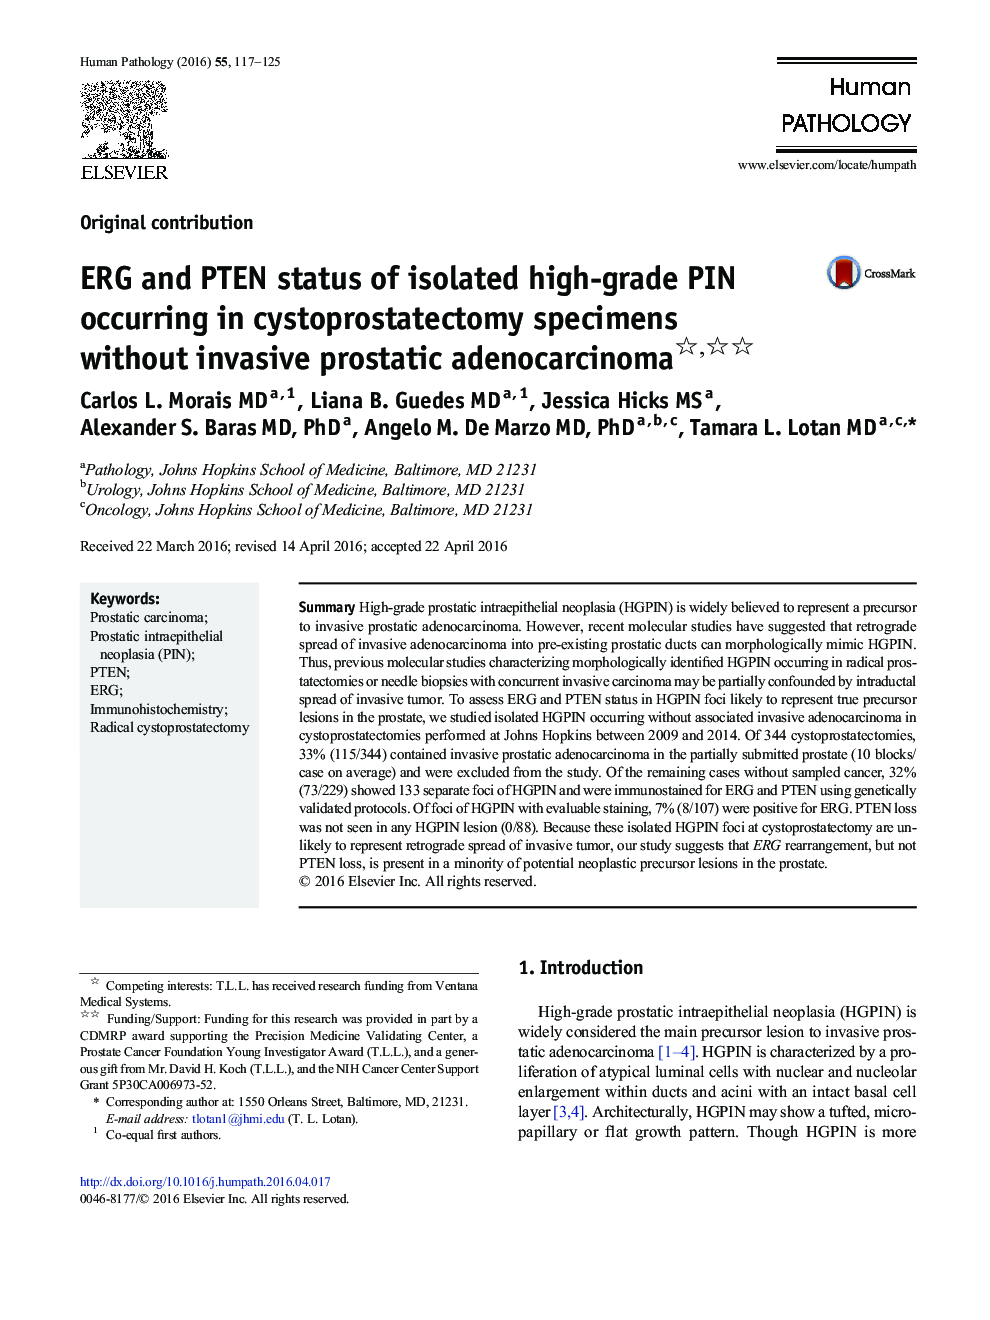 ERG and PTEN status of isolated high-grade PIN occurring in cystoprostatectomy specimens without invasive prostatic adenocarcinoma